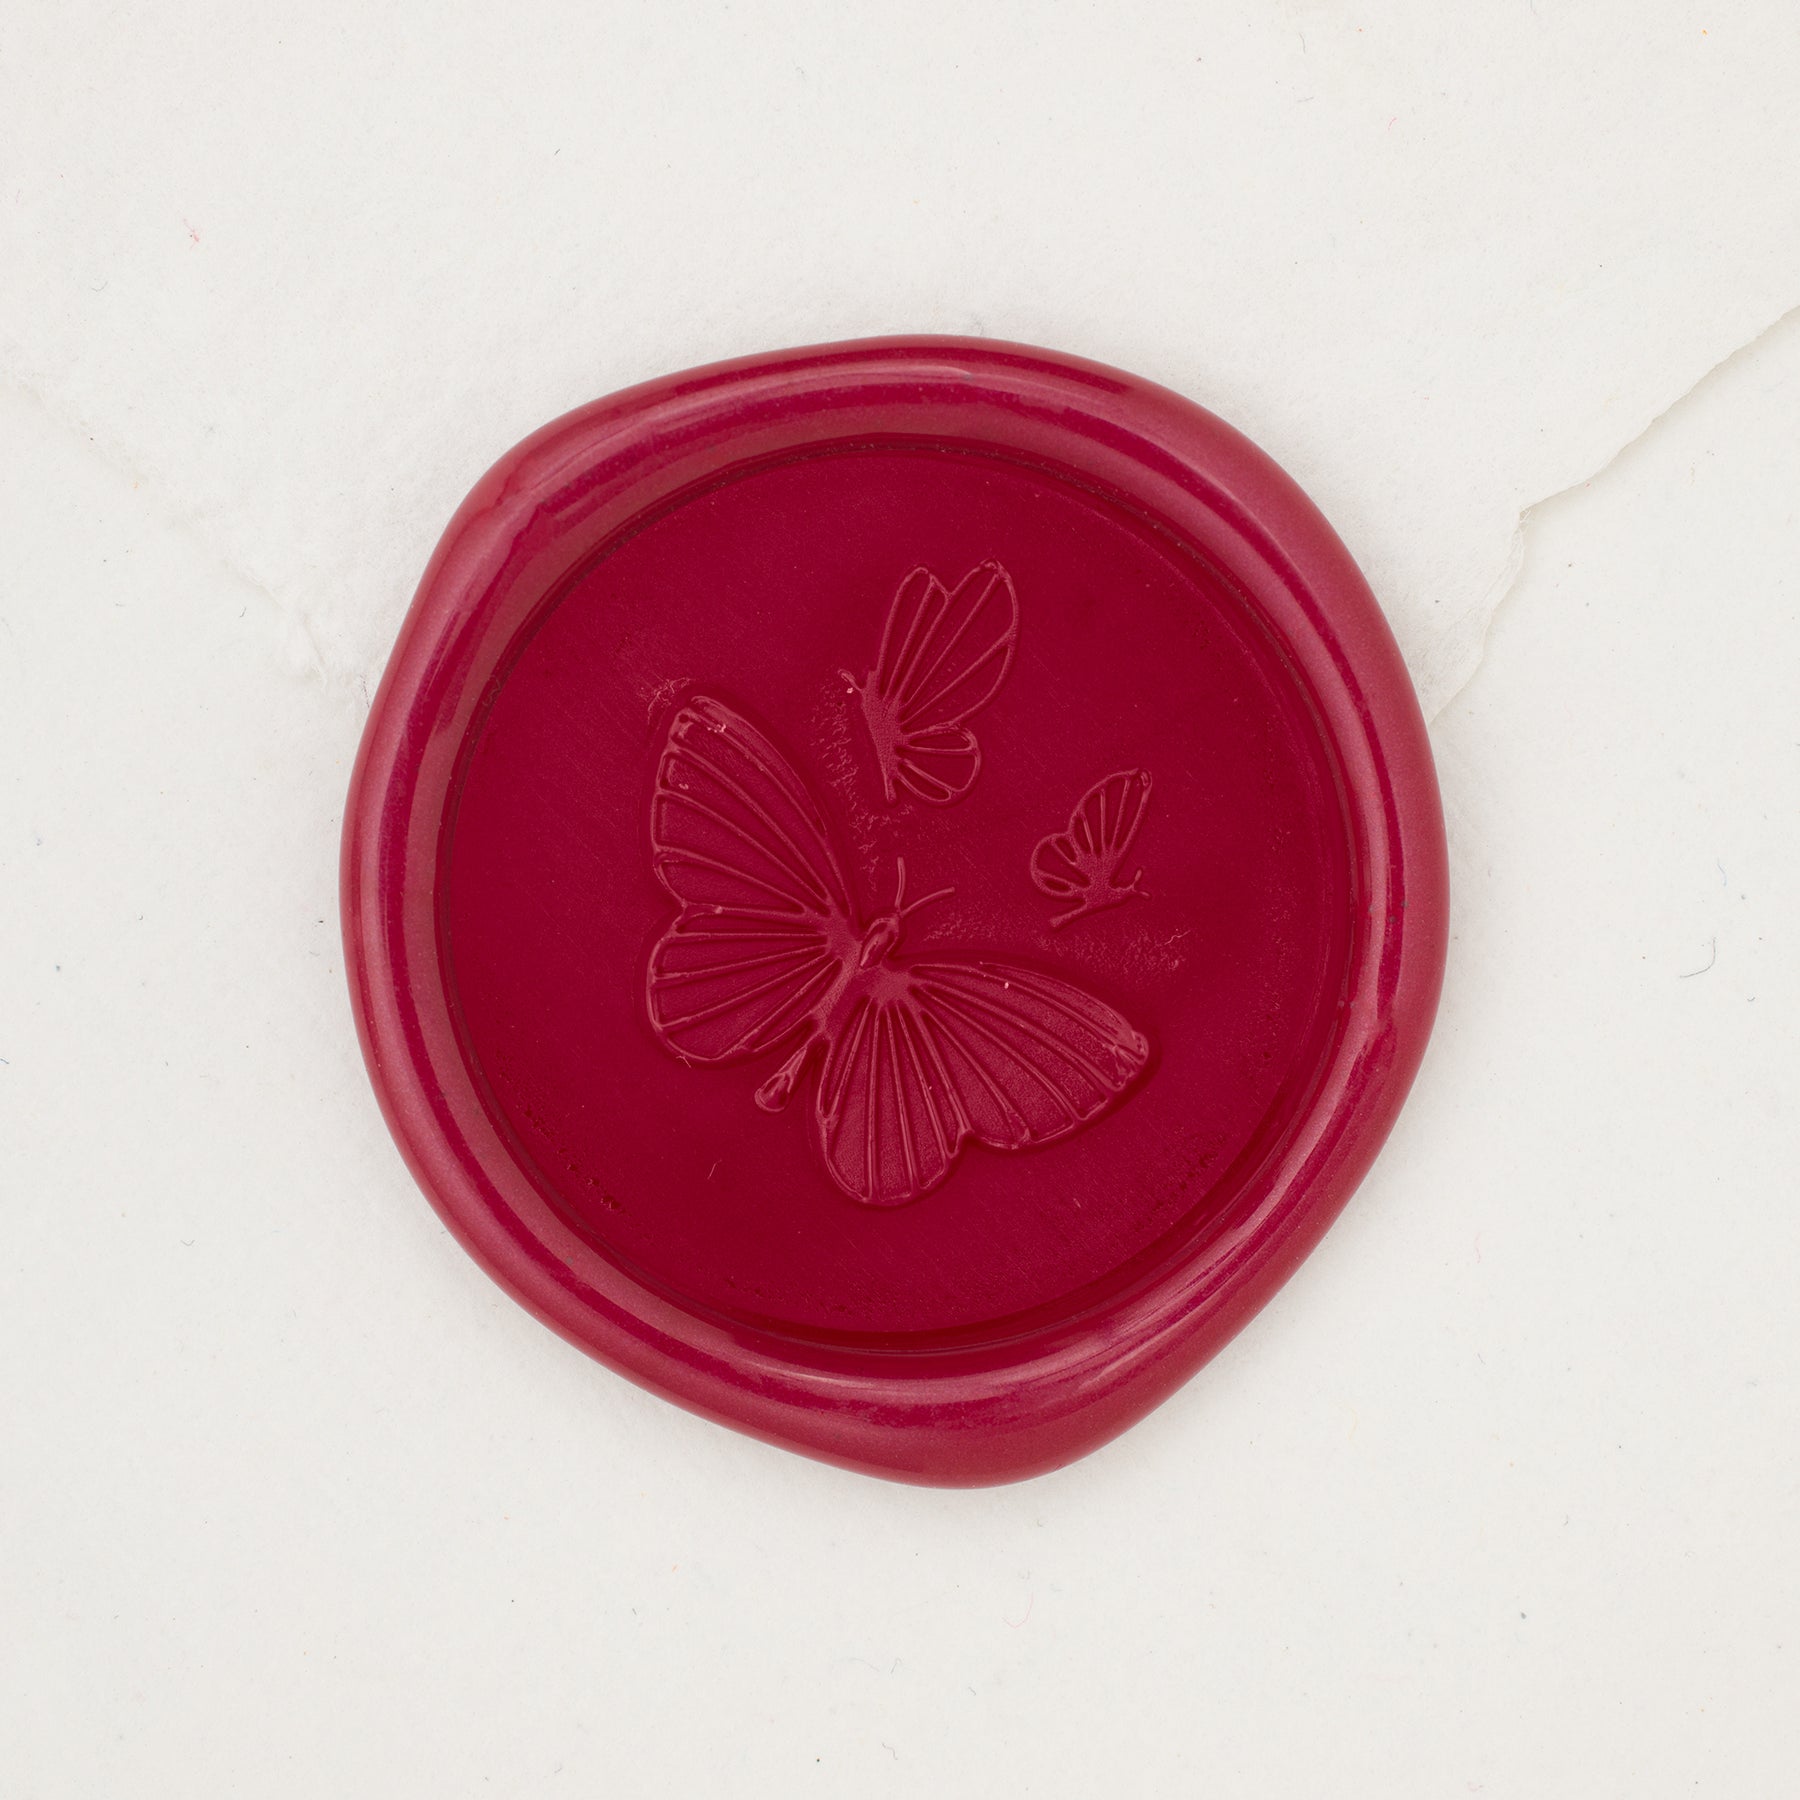 Cocoon to Butterfly Wax Letter Seal Kit, Butterfly Wax Stamp, Invitation  Seal, Wedding Gift Idea,letter Seal 